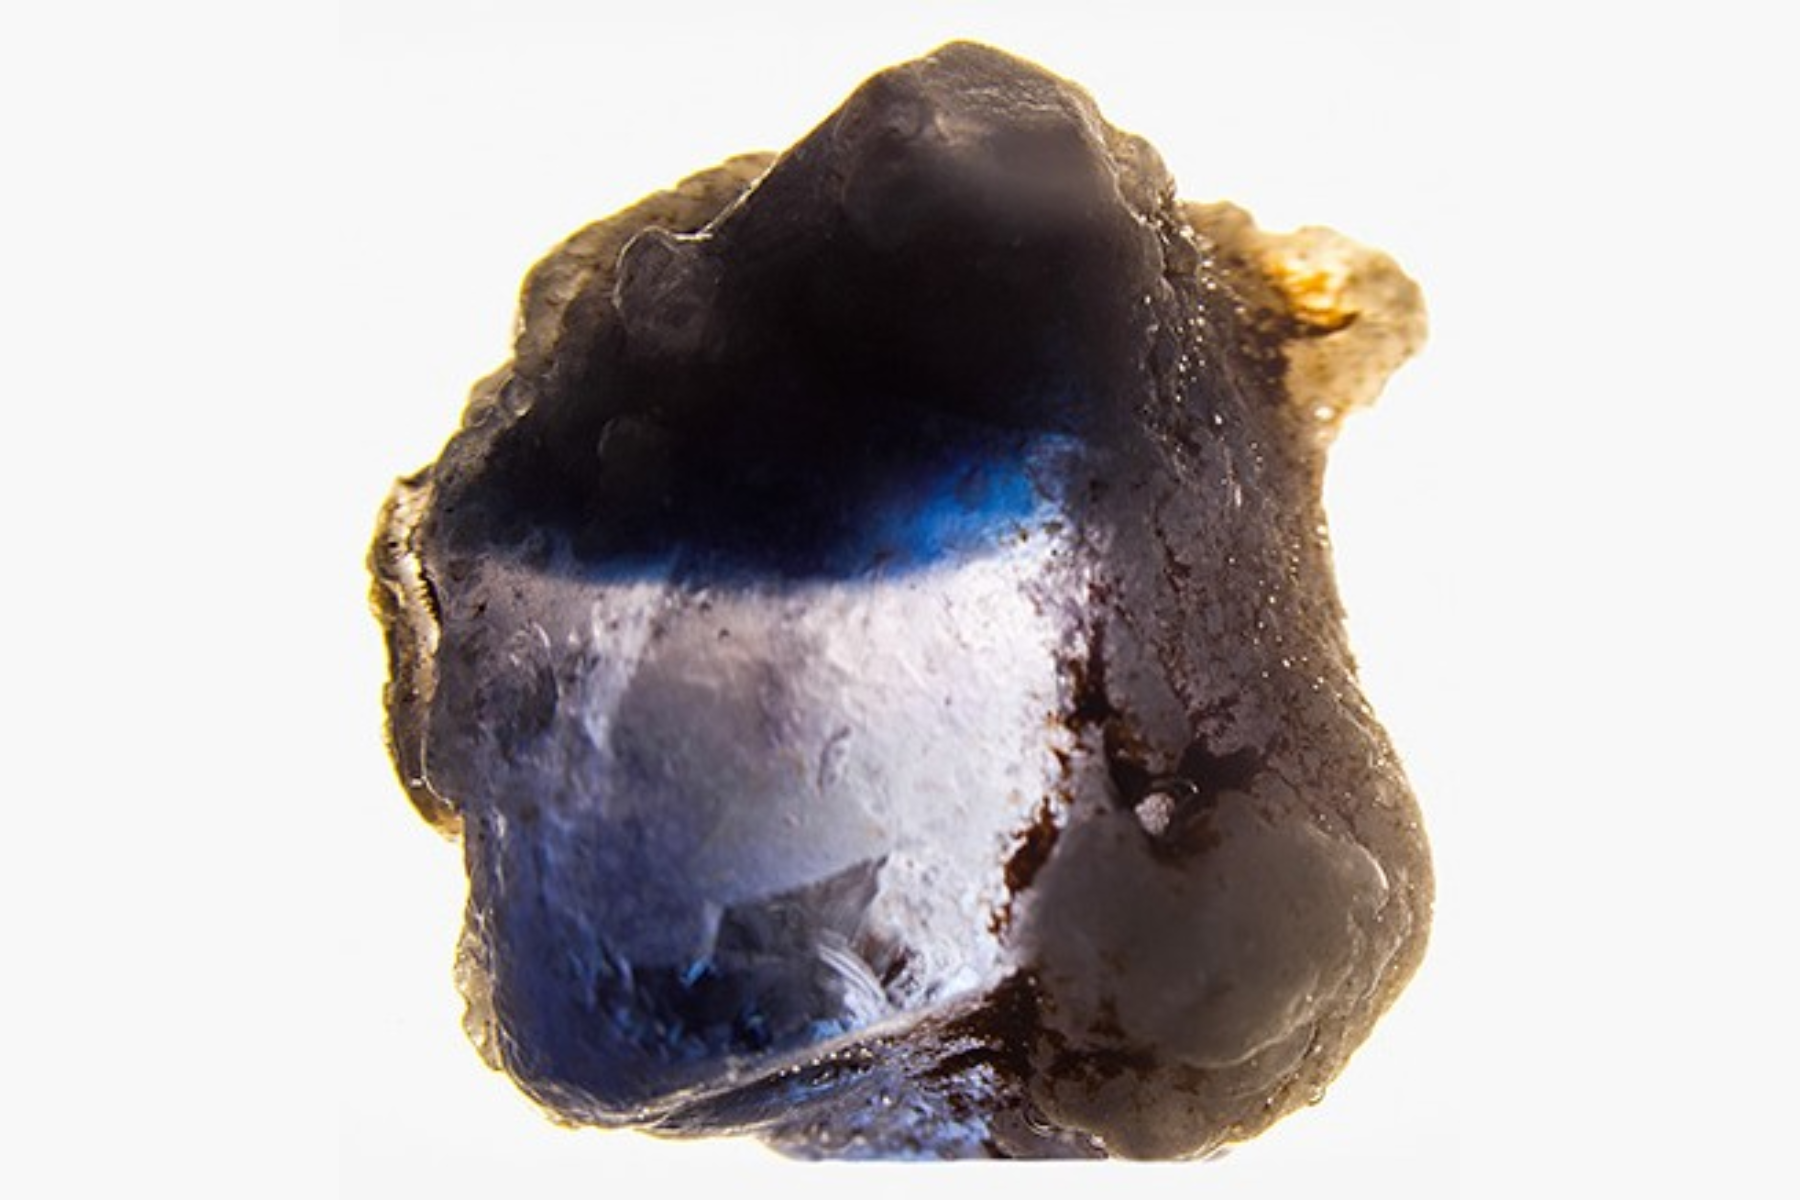 6.21 ct laboratory-grown sapphire with curved blue banding visible in water